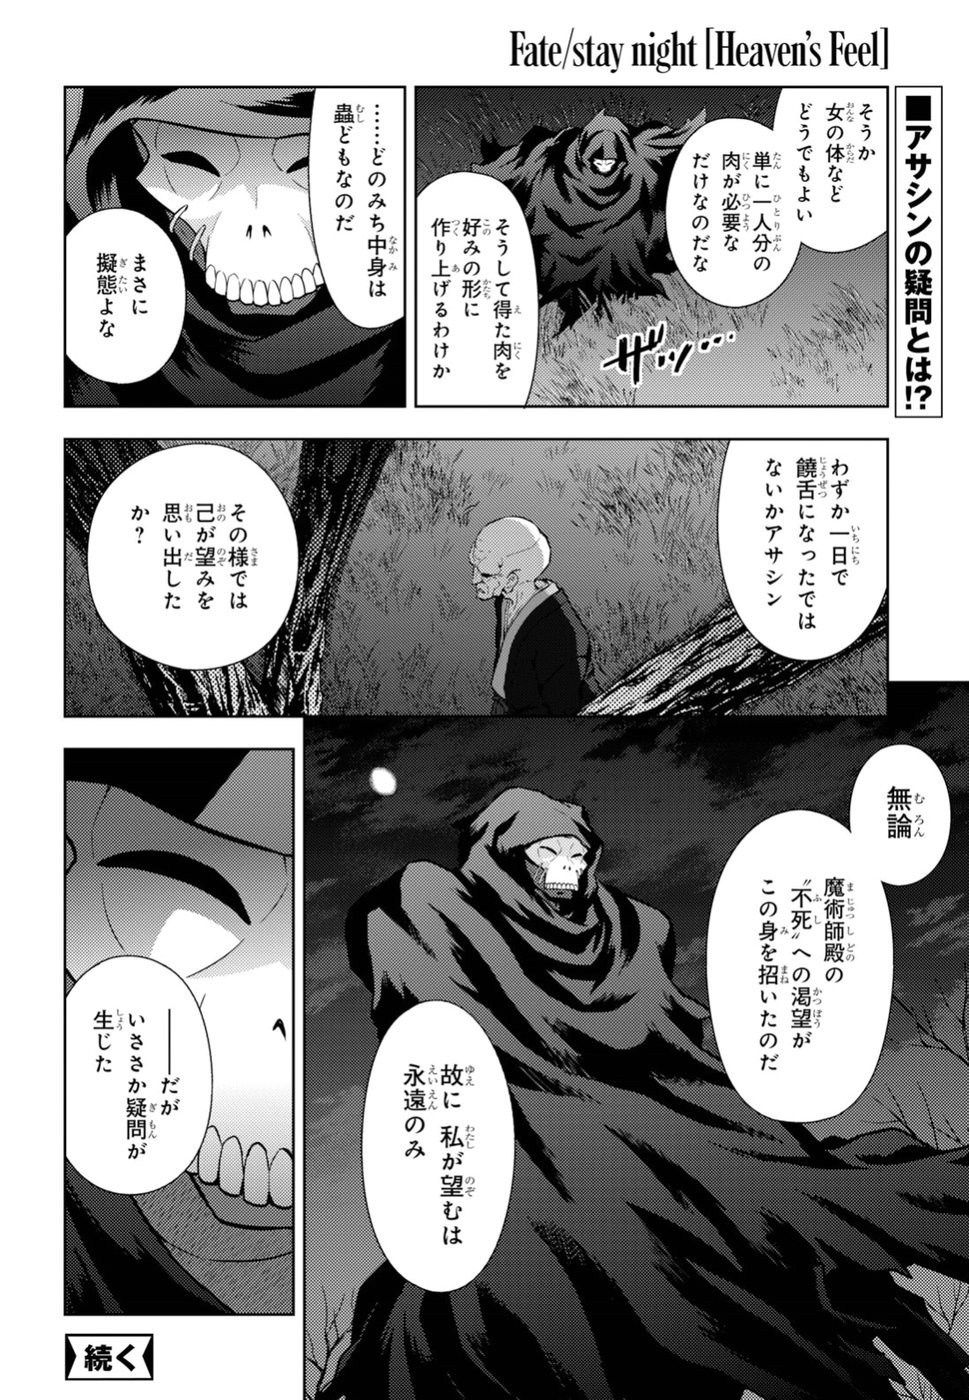 Fate/Stay night Heaven's Feel - Chapter 46 - Page 8